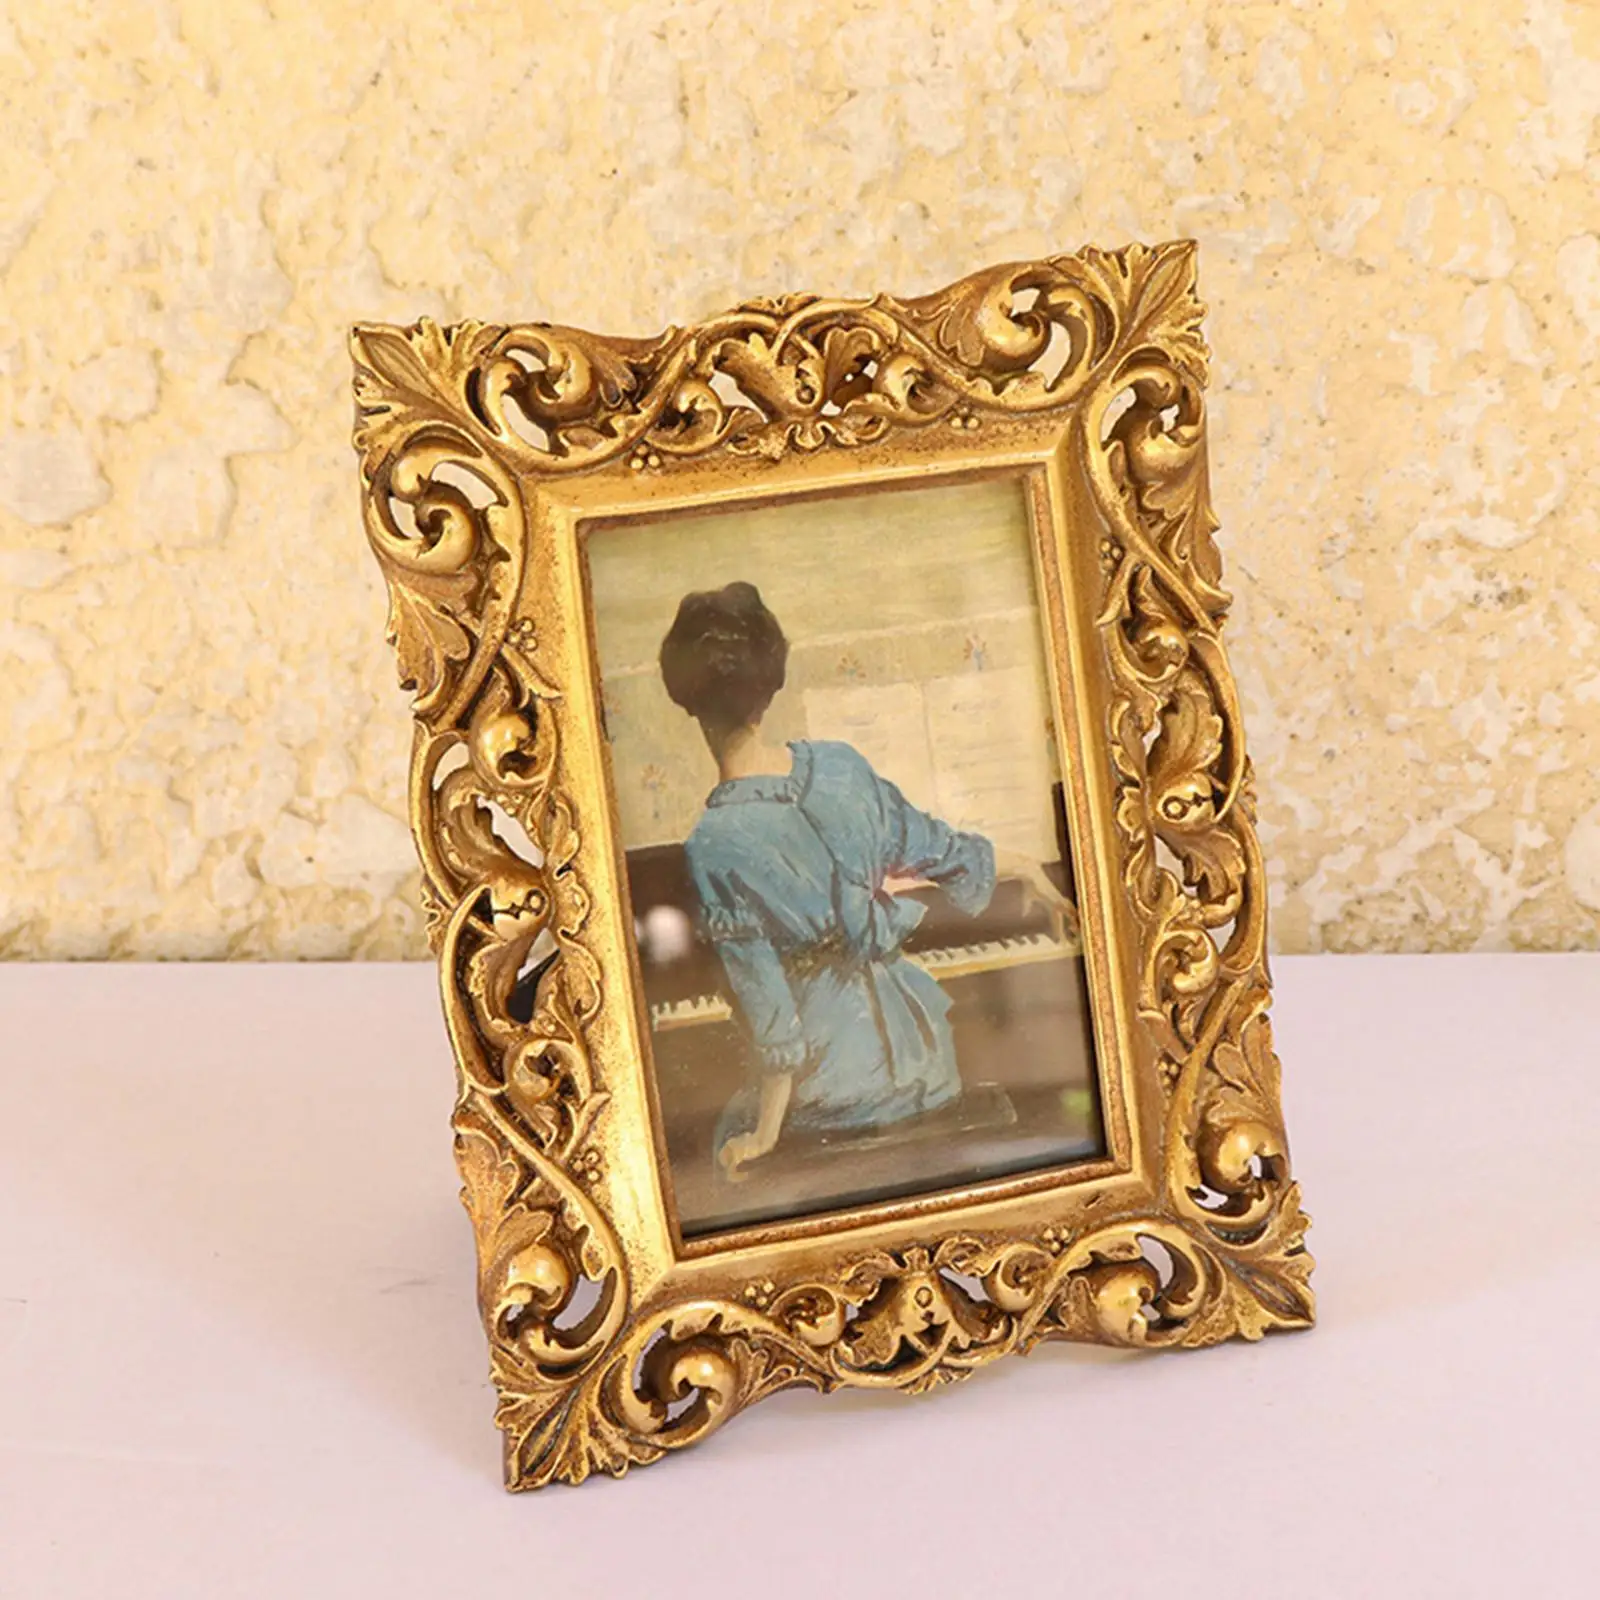 Retro Style Photo frame Hanging Polyresin Picture Holder Luxury Gift for Office Multi Occasions Gallery decoration